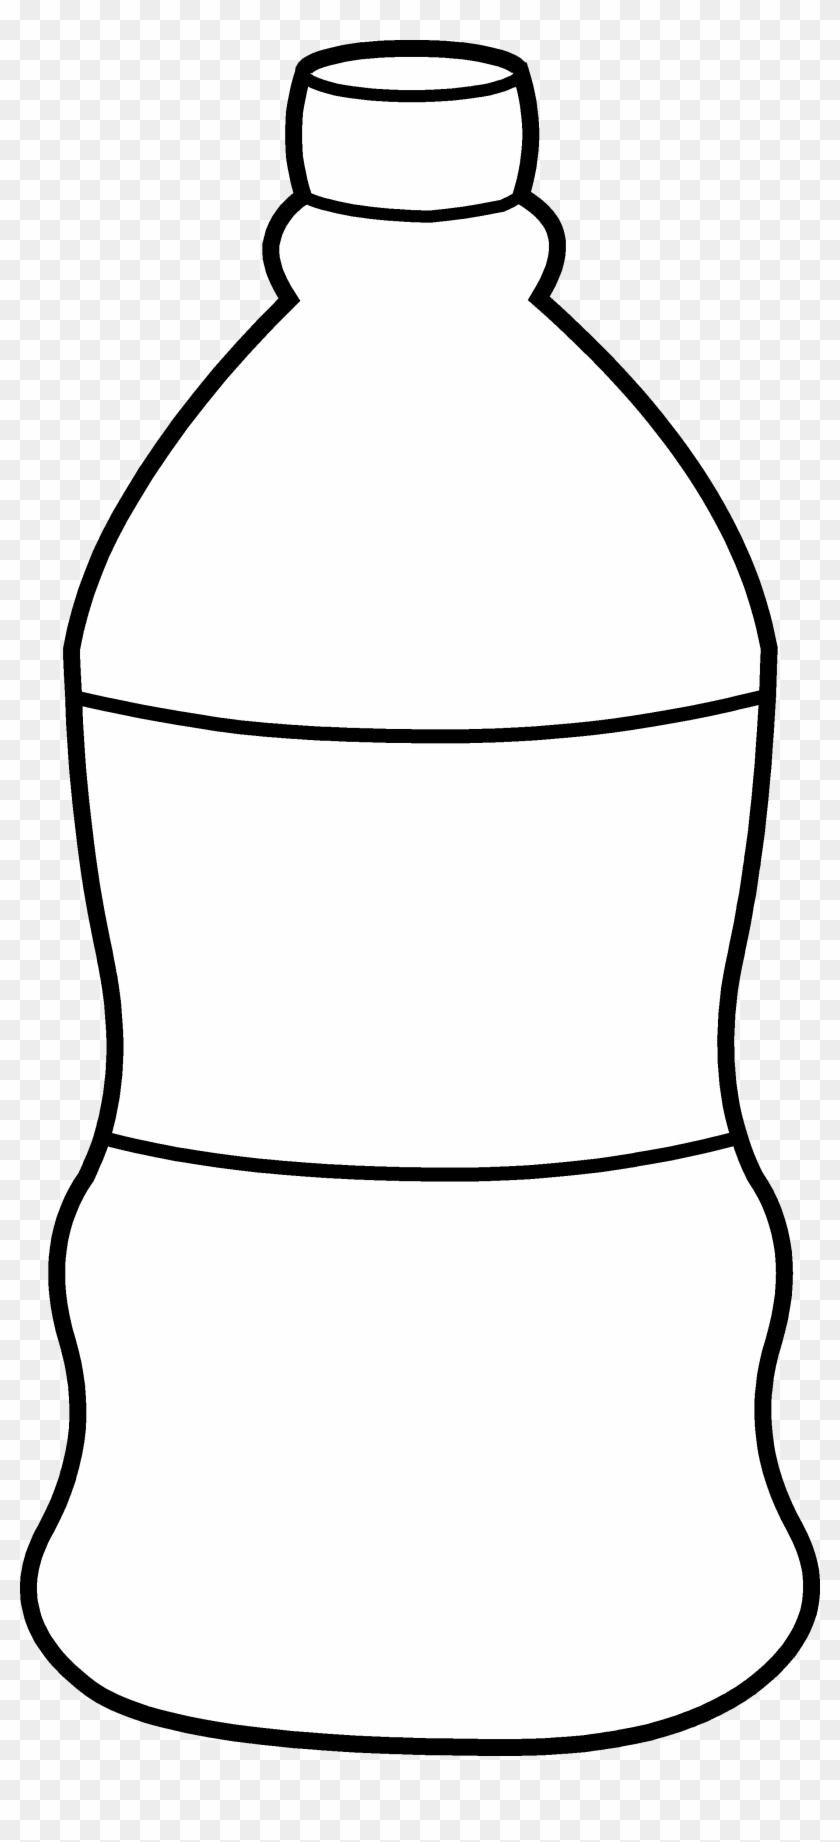 Black - And - White - Water - Clipart - Template Of A Water Bottle #1022522